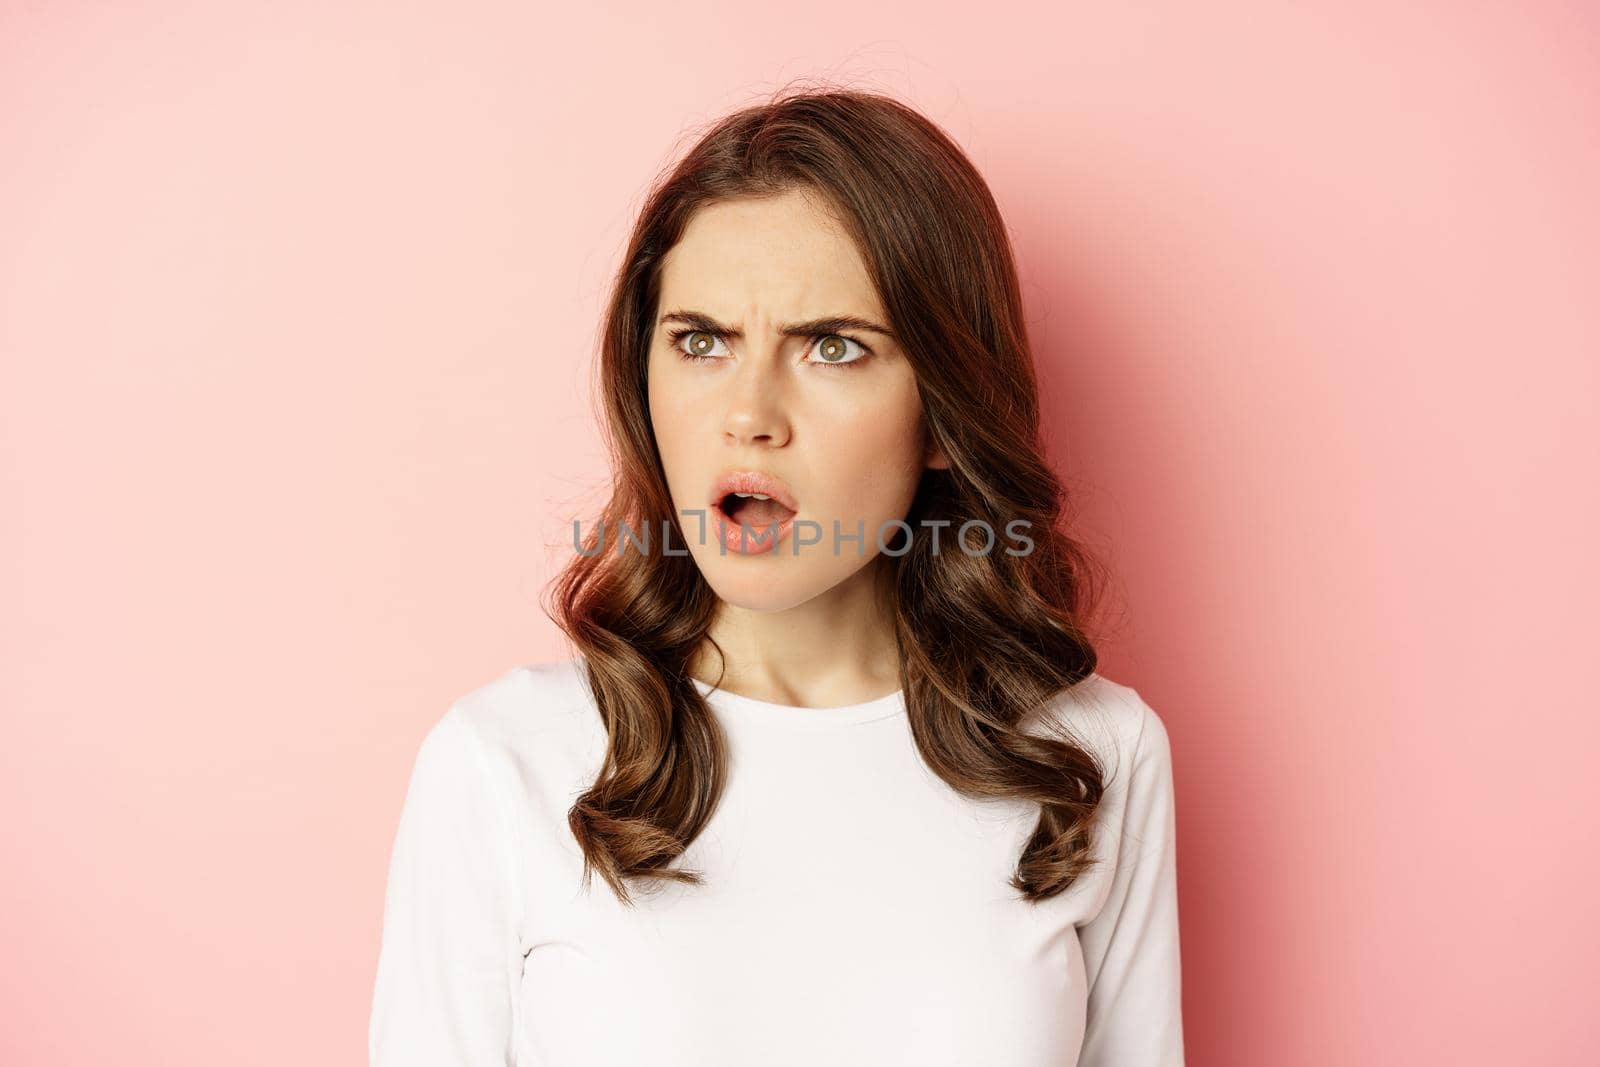 Close up portrait of confused, frustrated young woman, looking left with disappointment, puzzled by something, standing over pink background.